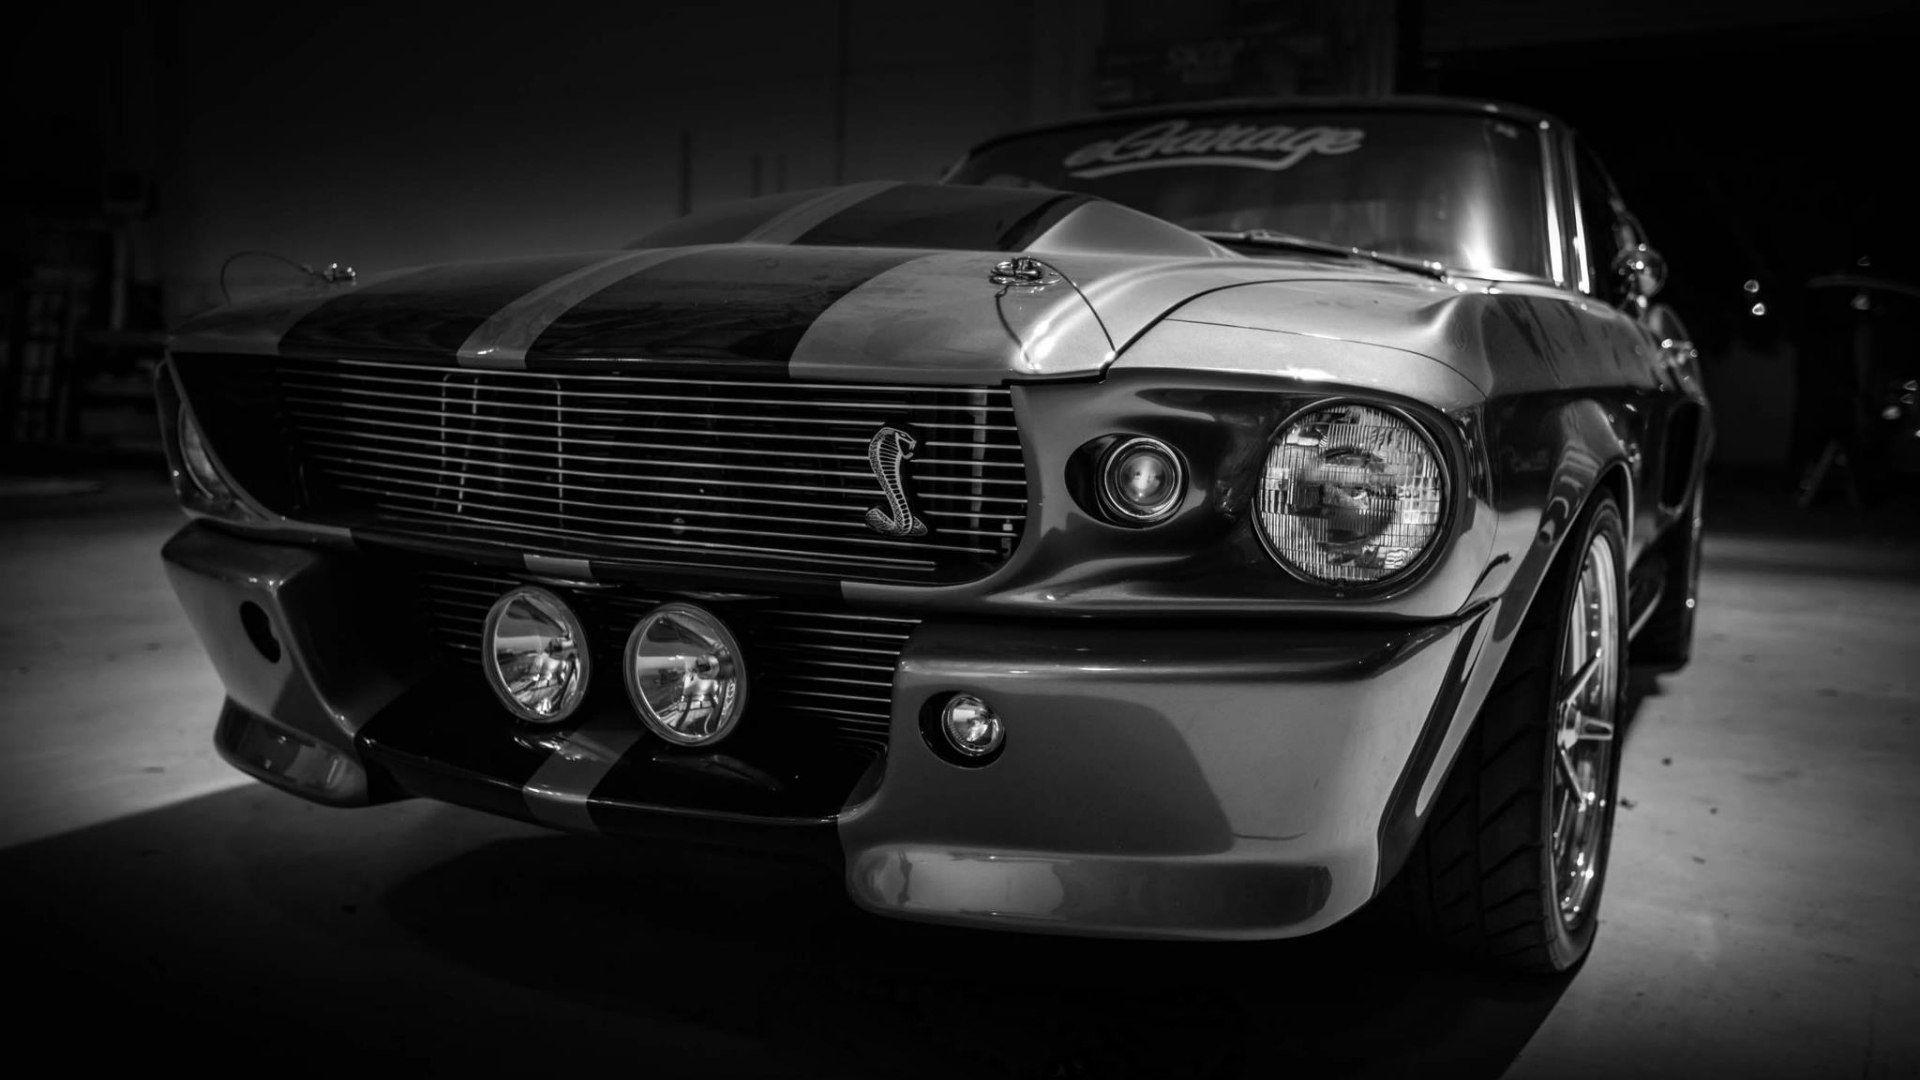 Download wallpaper 1920x1080 shelby, gt eleanor, ford mustang HD